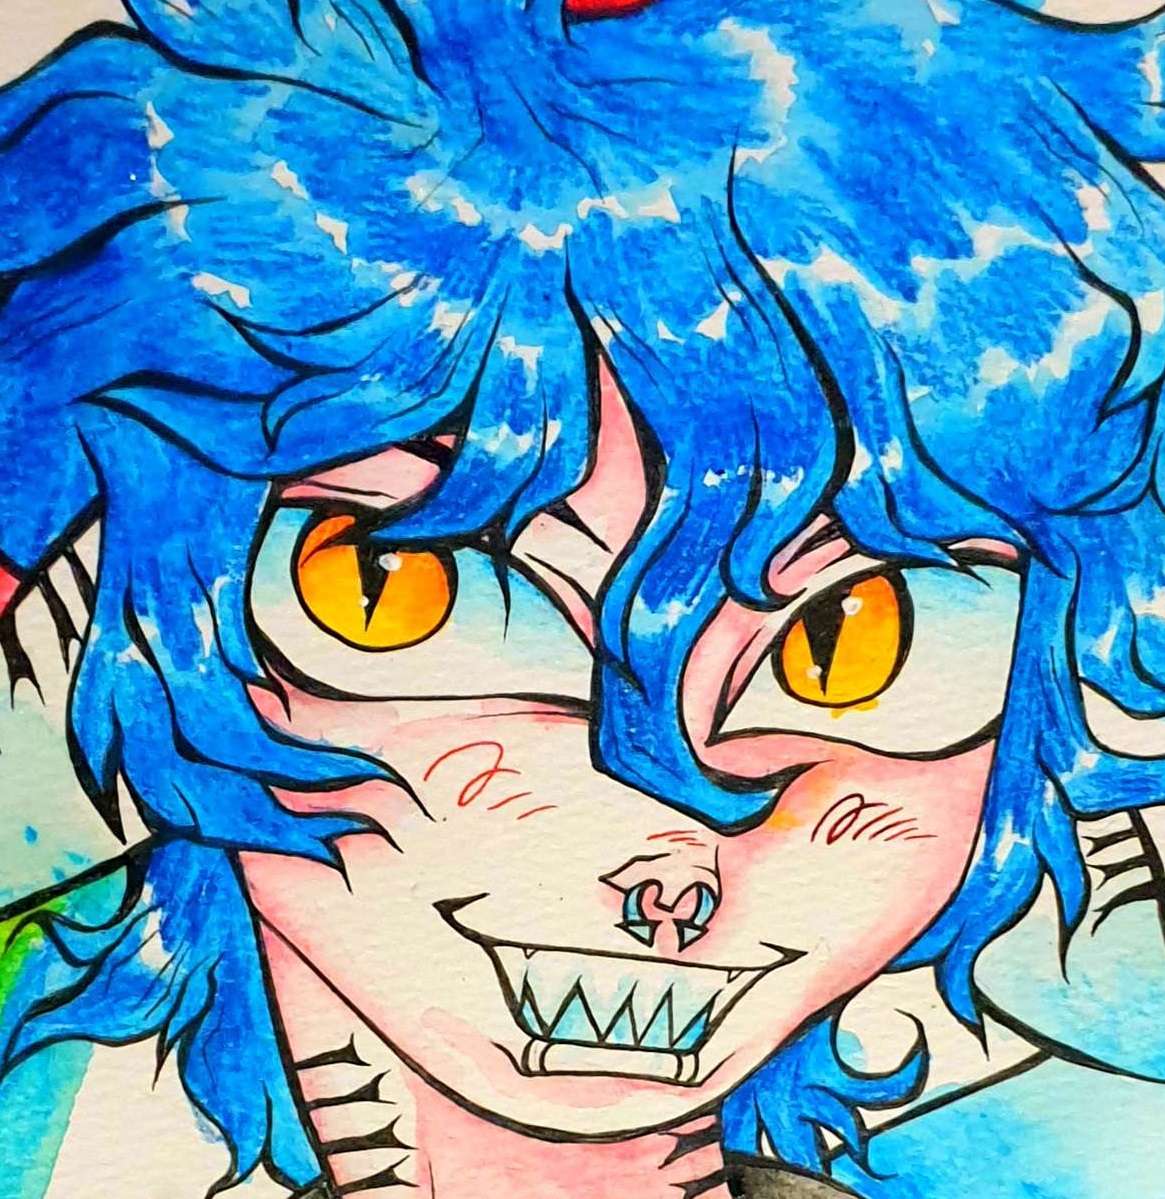 This is an ilustration I did for a secret santa for a friend, who loves sharks and Y2K fashion. IMAGE ID: A traditional painting with watercolour and ink. A colourful illustration of a guy with spiky, wavy blue hair and yellow eyes with slit pupils. He has blue fins for ears anda blue-tipped shark tail, along with spiky eeth. He wears a blue tank top, a ed jacket, and grey headphones, along with a black and gold spiked choker. He is grinning and there is a rainbow behind him. END ID.